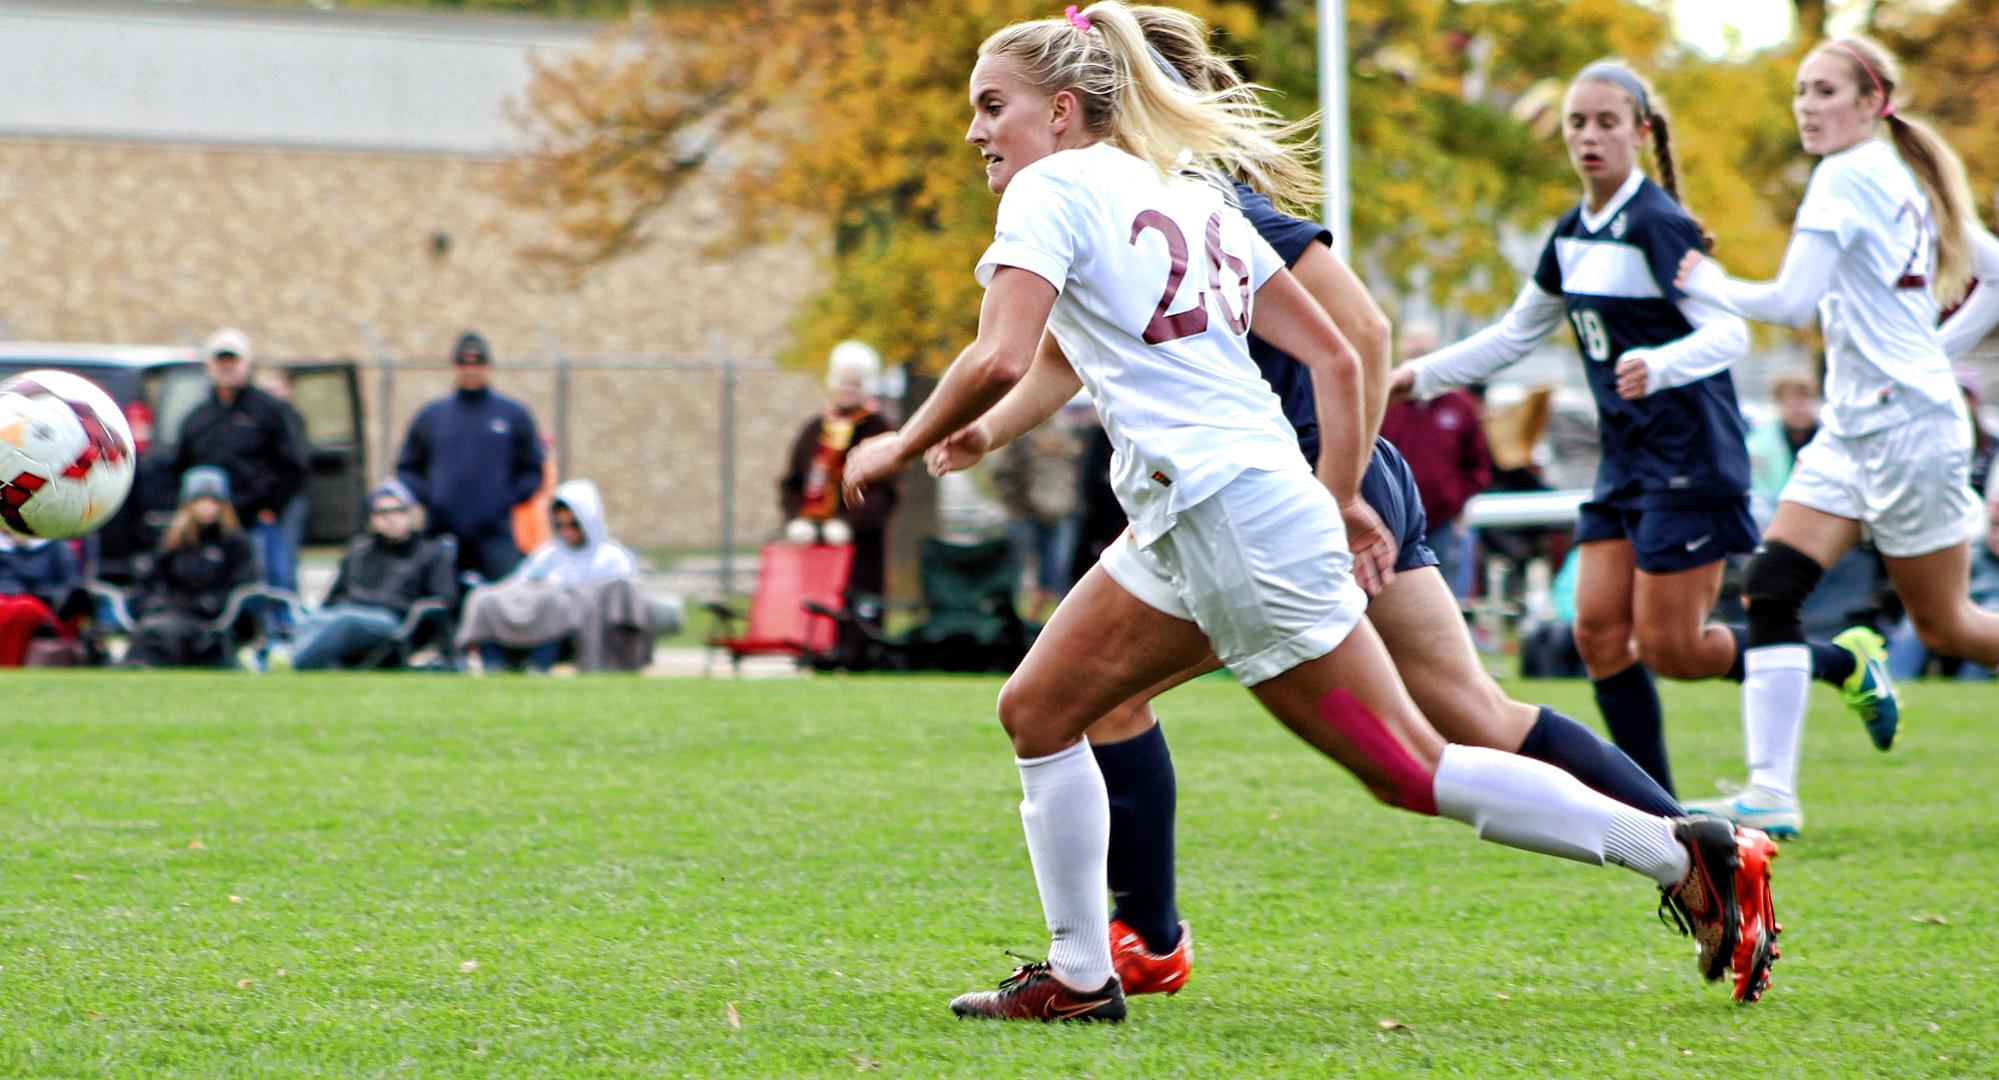 Senior forward Paige McCullough races a defender for the ball during the Cobbers' game with Carleton. McCullough scored CC's only goal in the game.